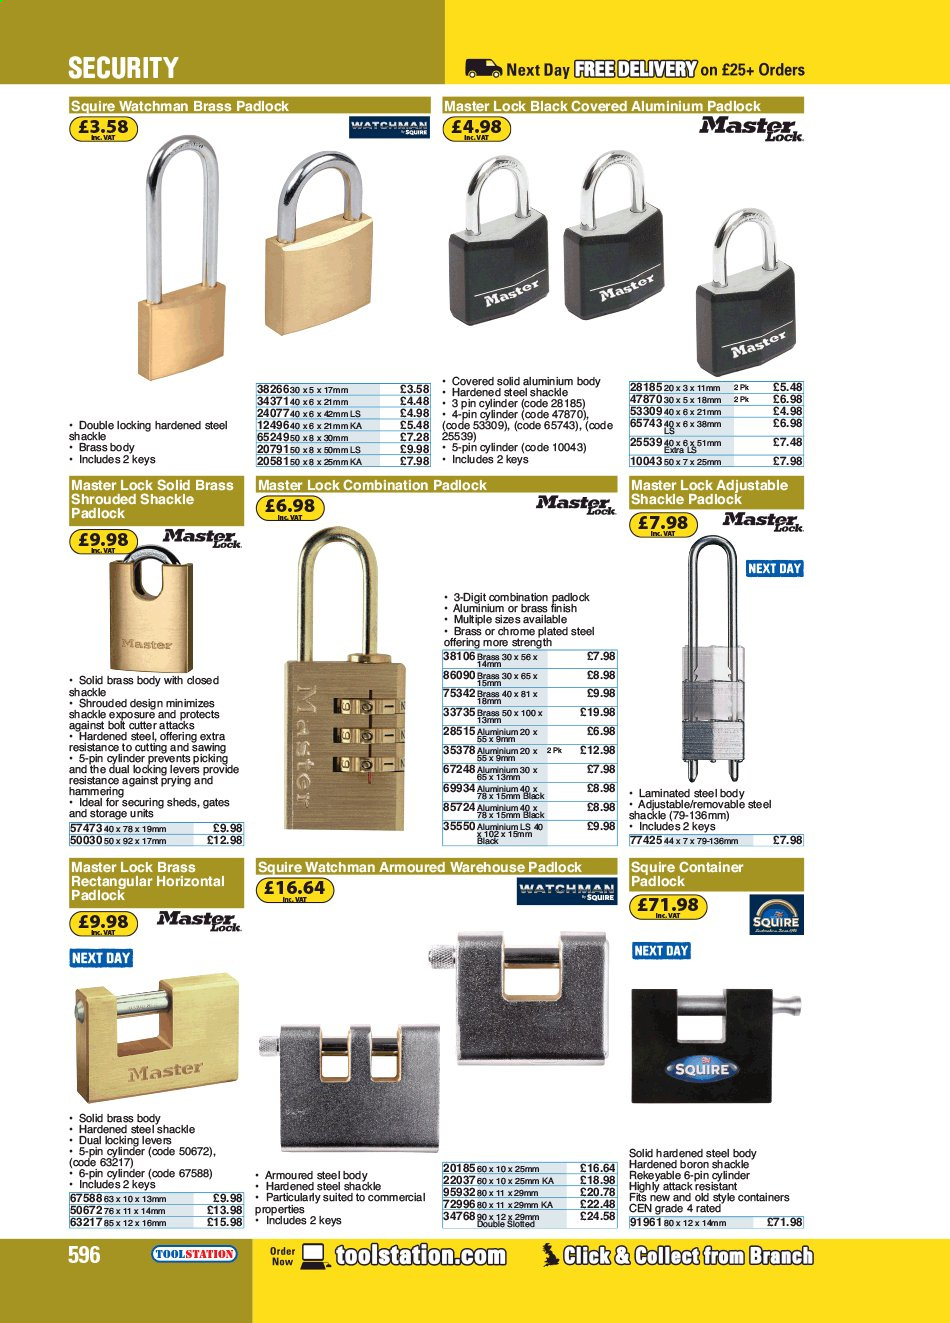 Toolstation offer . Page 596.